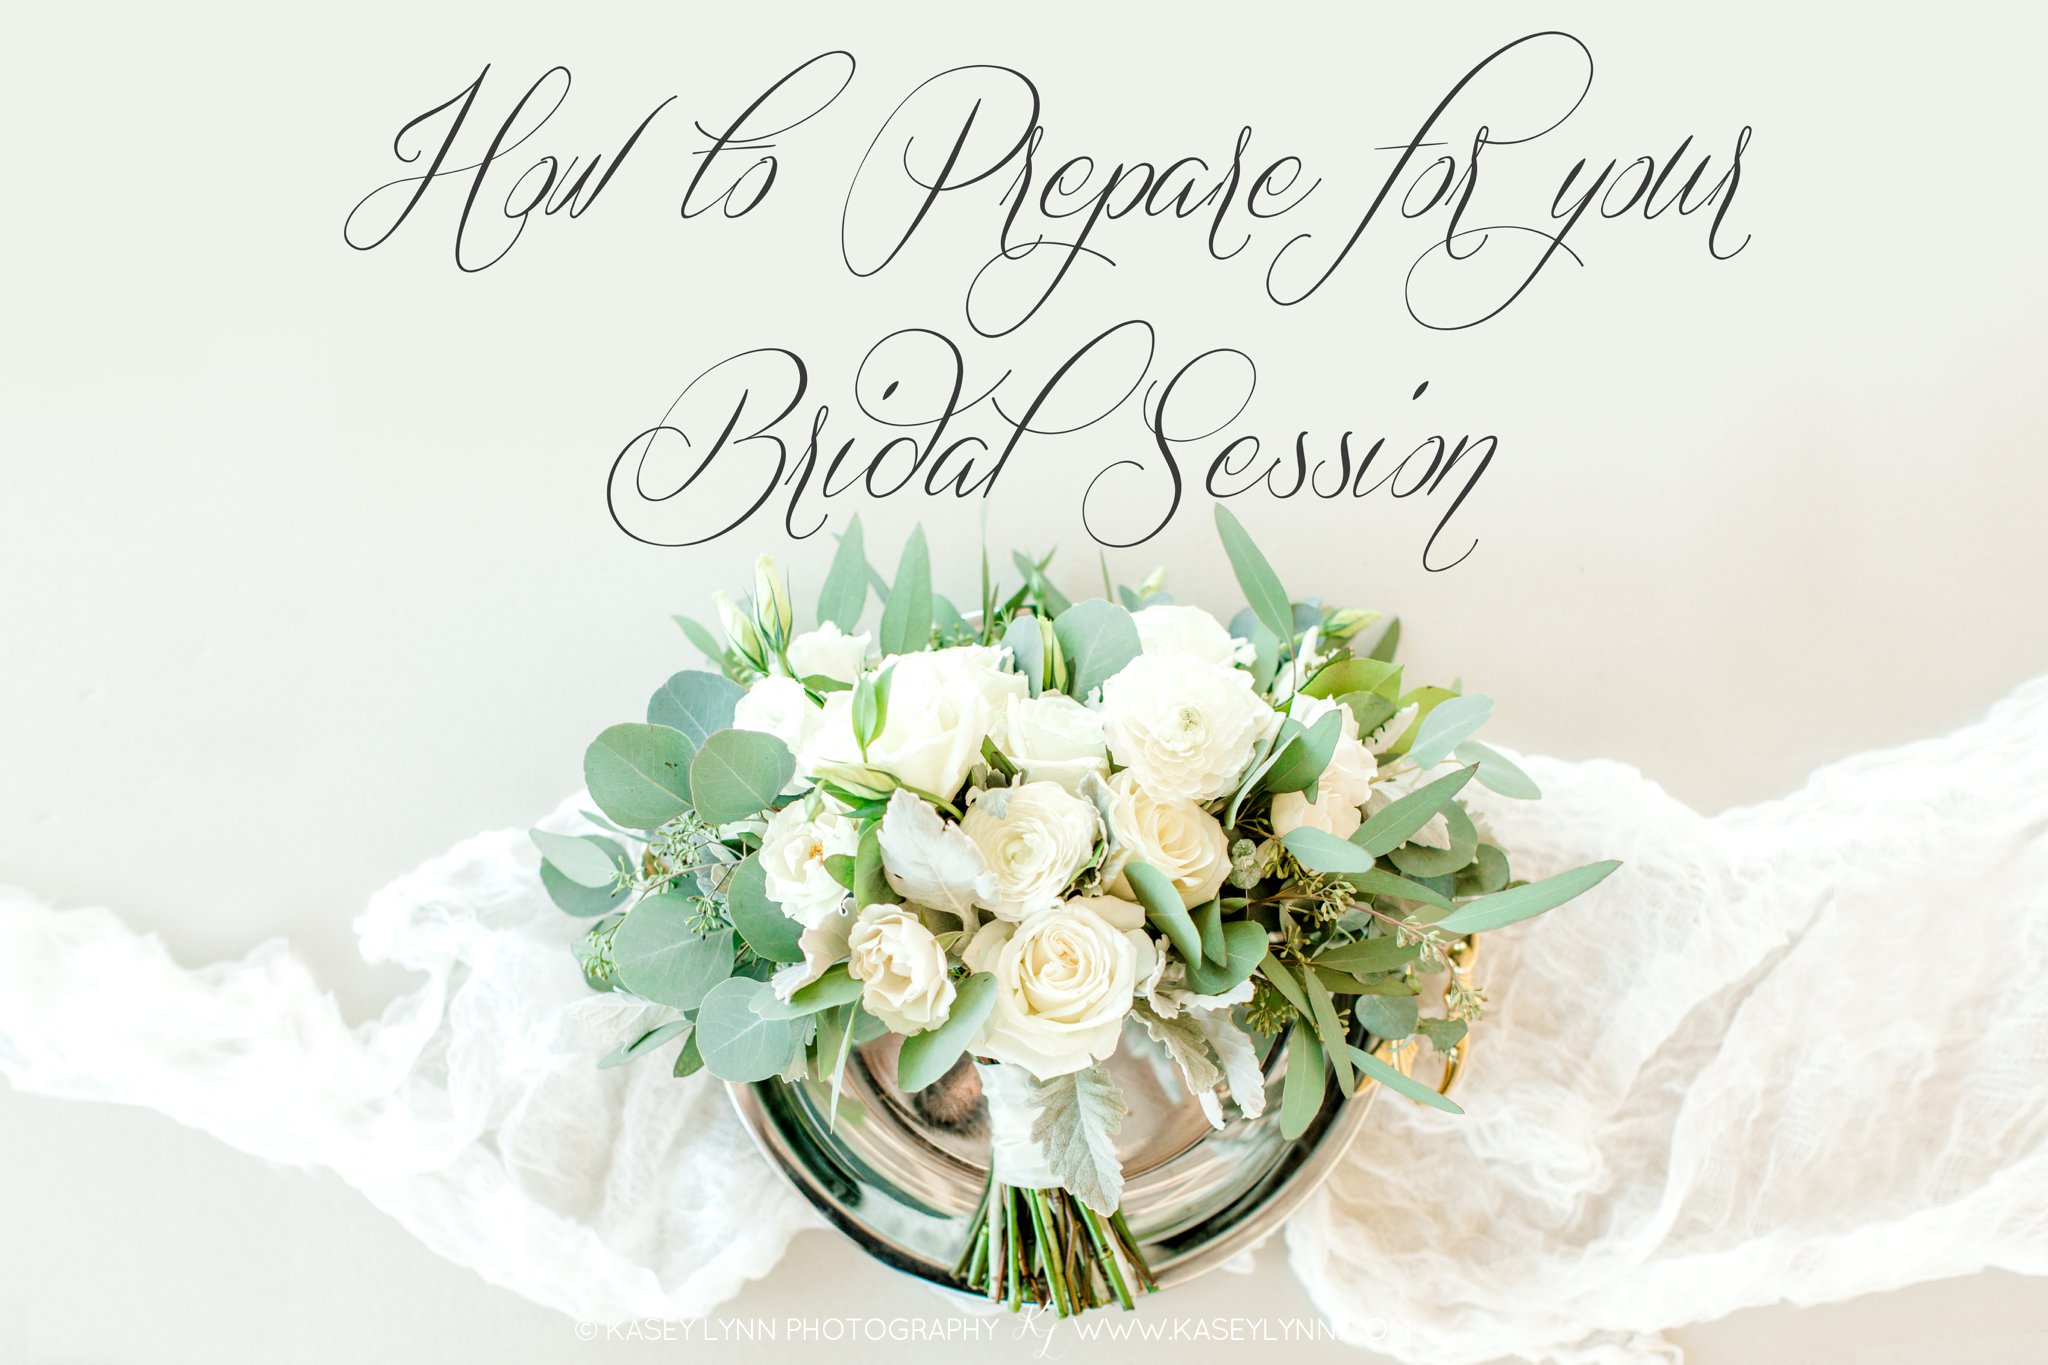 How to Prepare for my bridal session / Kasey Lynn Photography